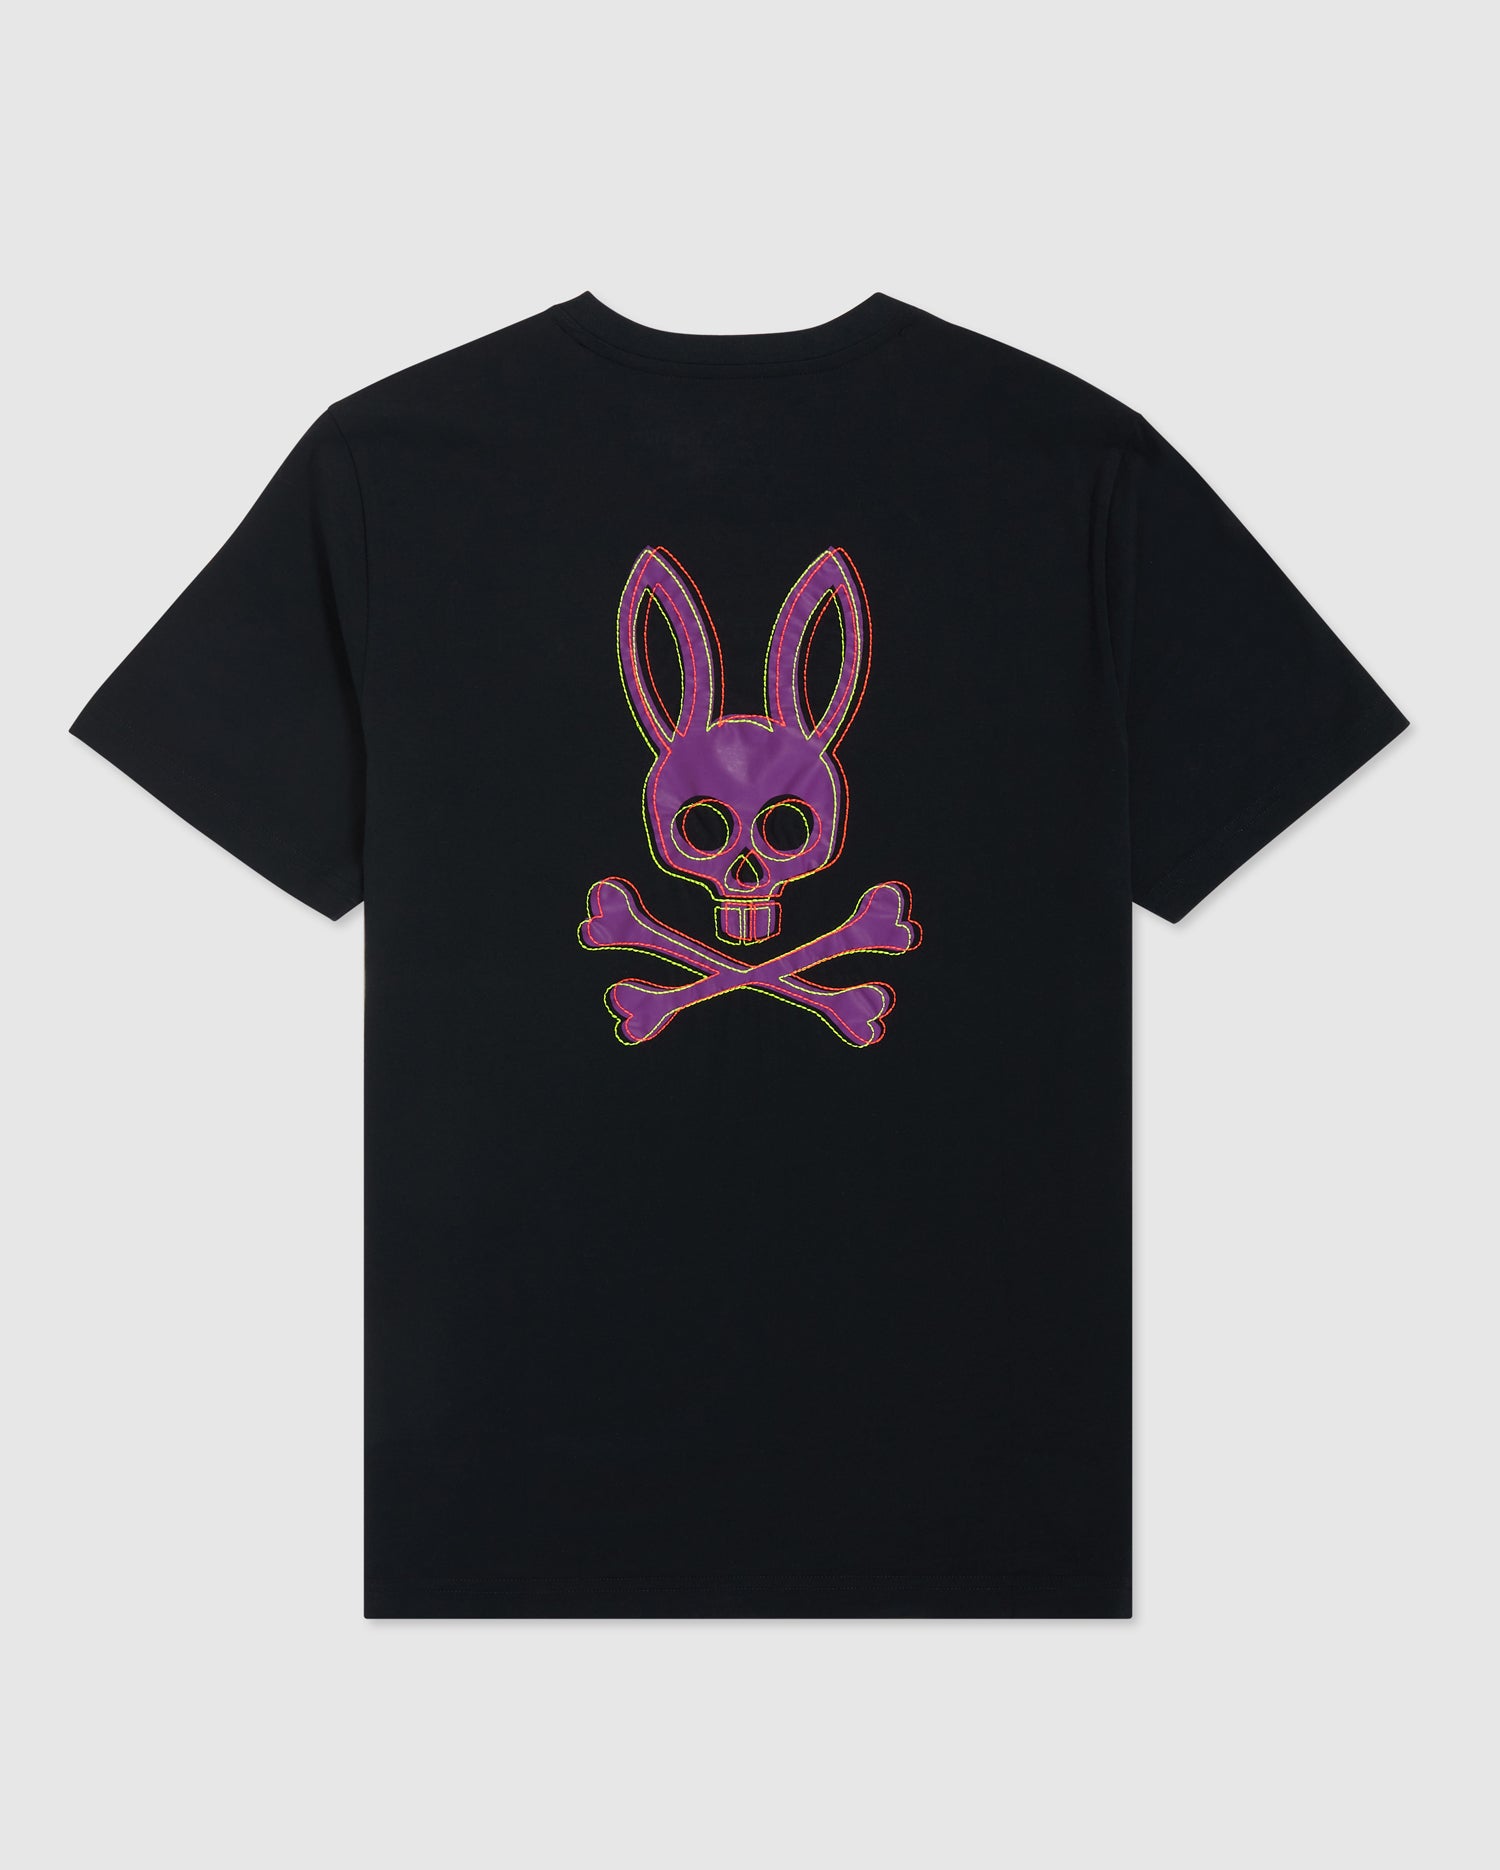 Buy Psycho Bunny Keswick Graphic Tee Shirt at In Style – InStyle-Tuscaloosa